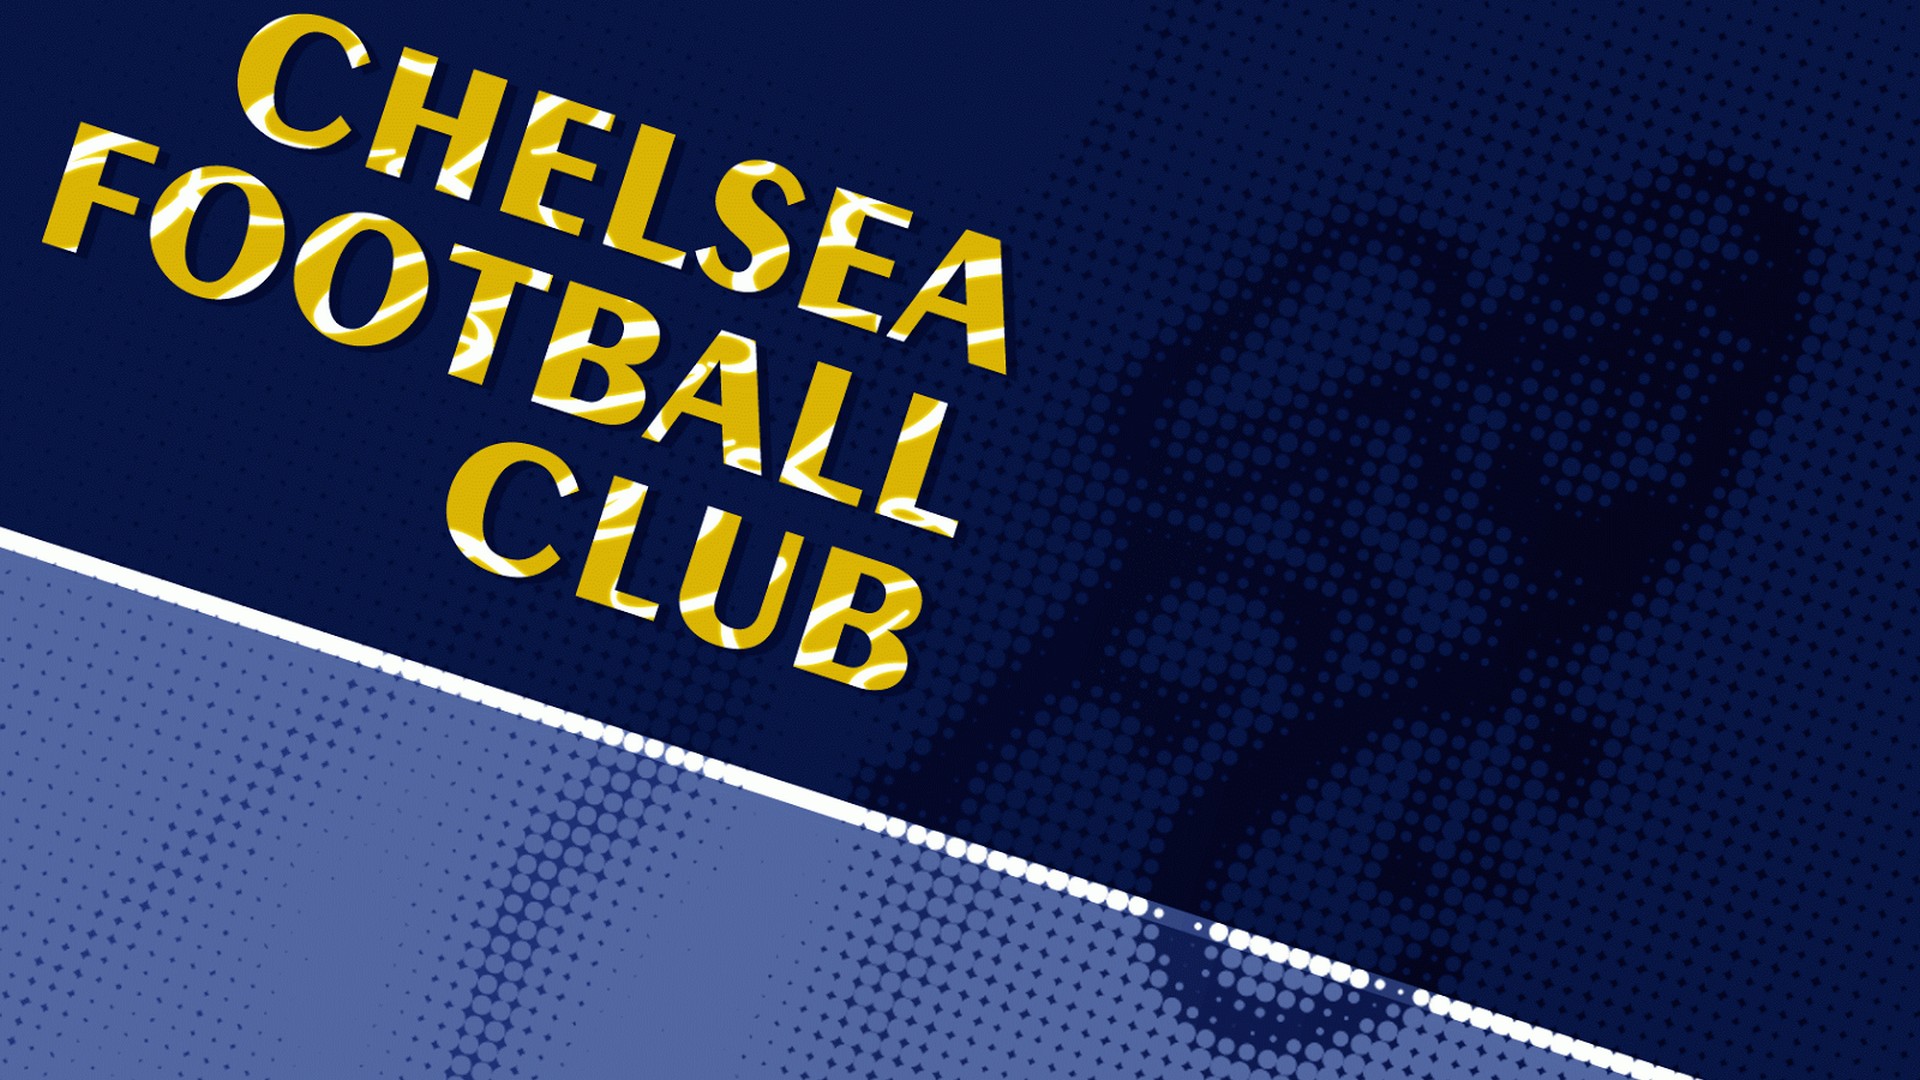 Chelsea HD Wallpapers with resolution 1920x1080 pixel. You can make this wallpaper for your Mac or Windows Desktop Background, iPhone, Android or Tablet and another Smartphone device